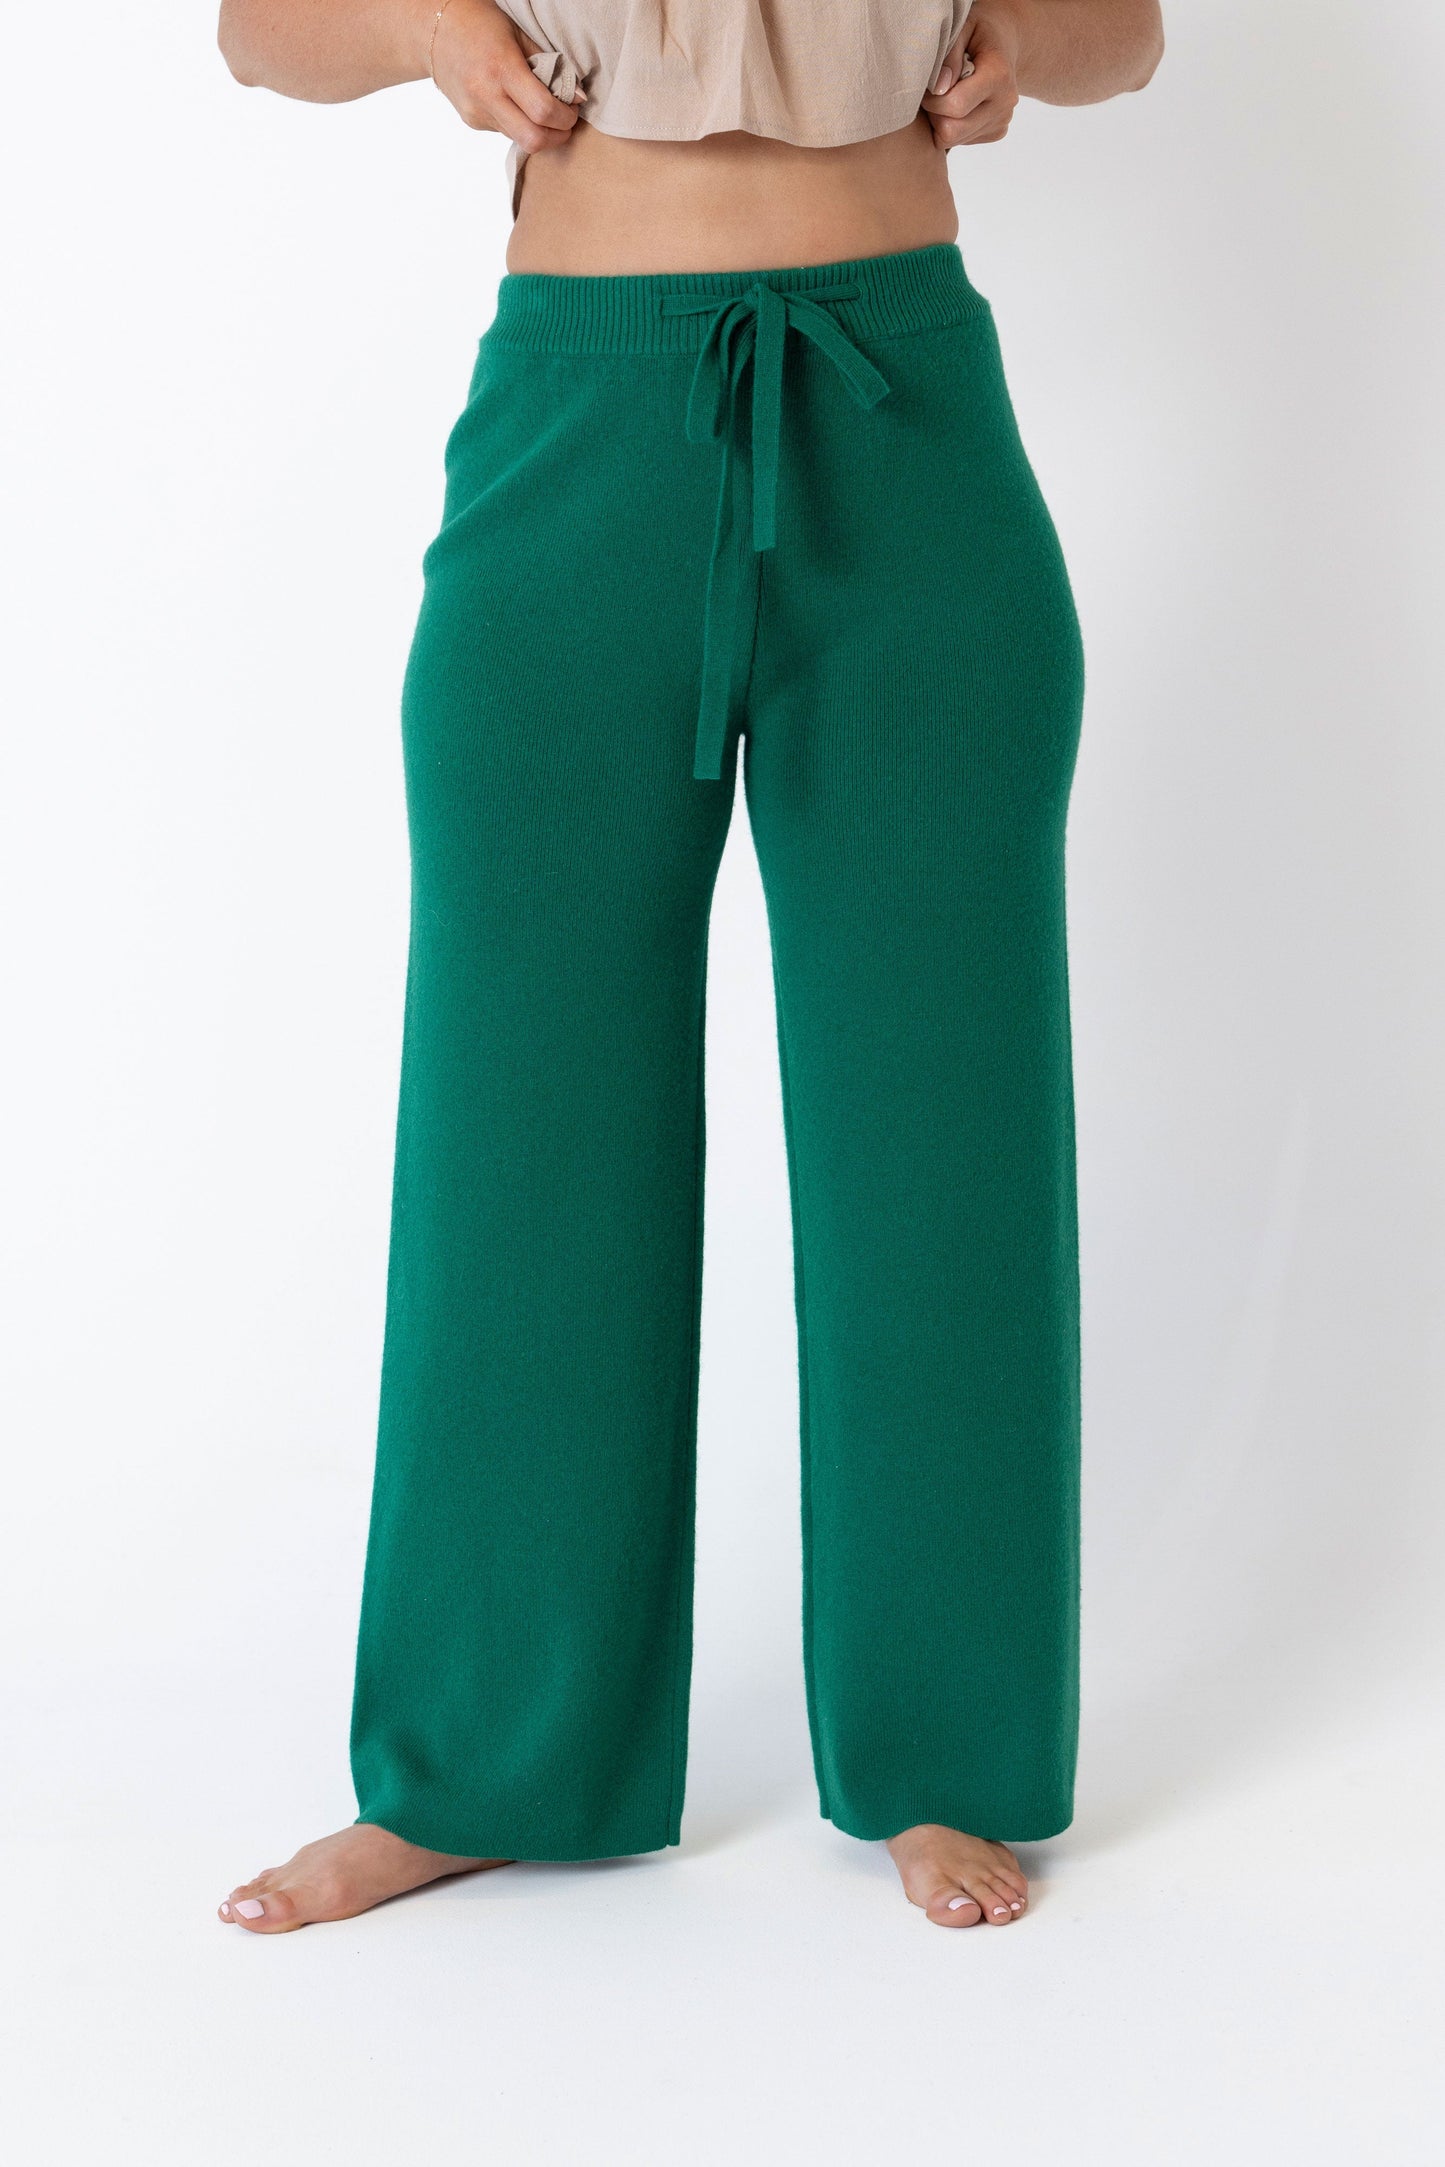 ALESSIA HIGH RISE KNIT PANT BRIGHT GREEN